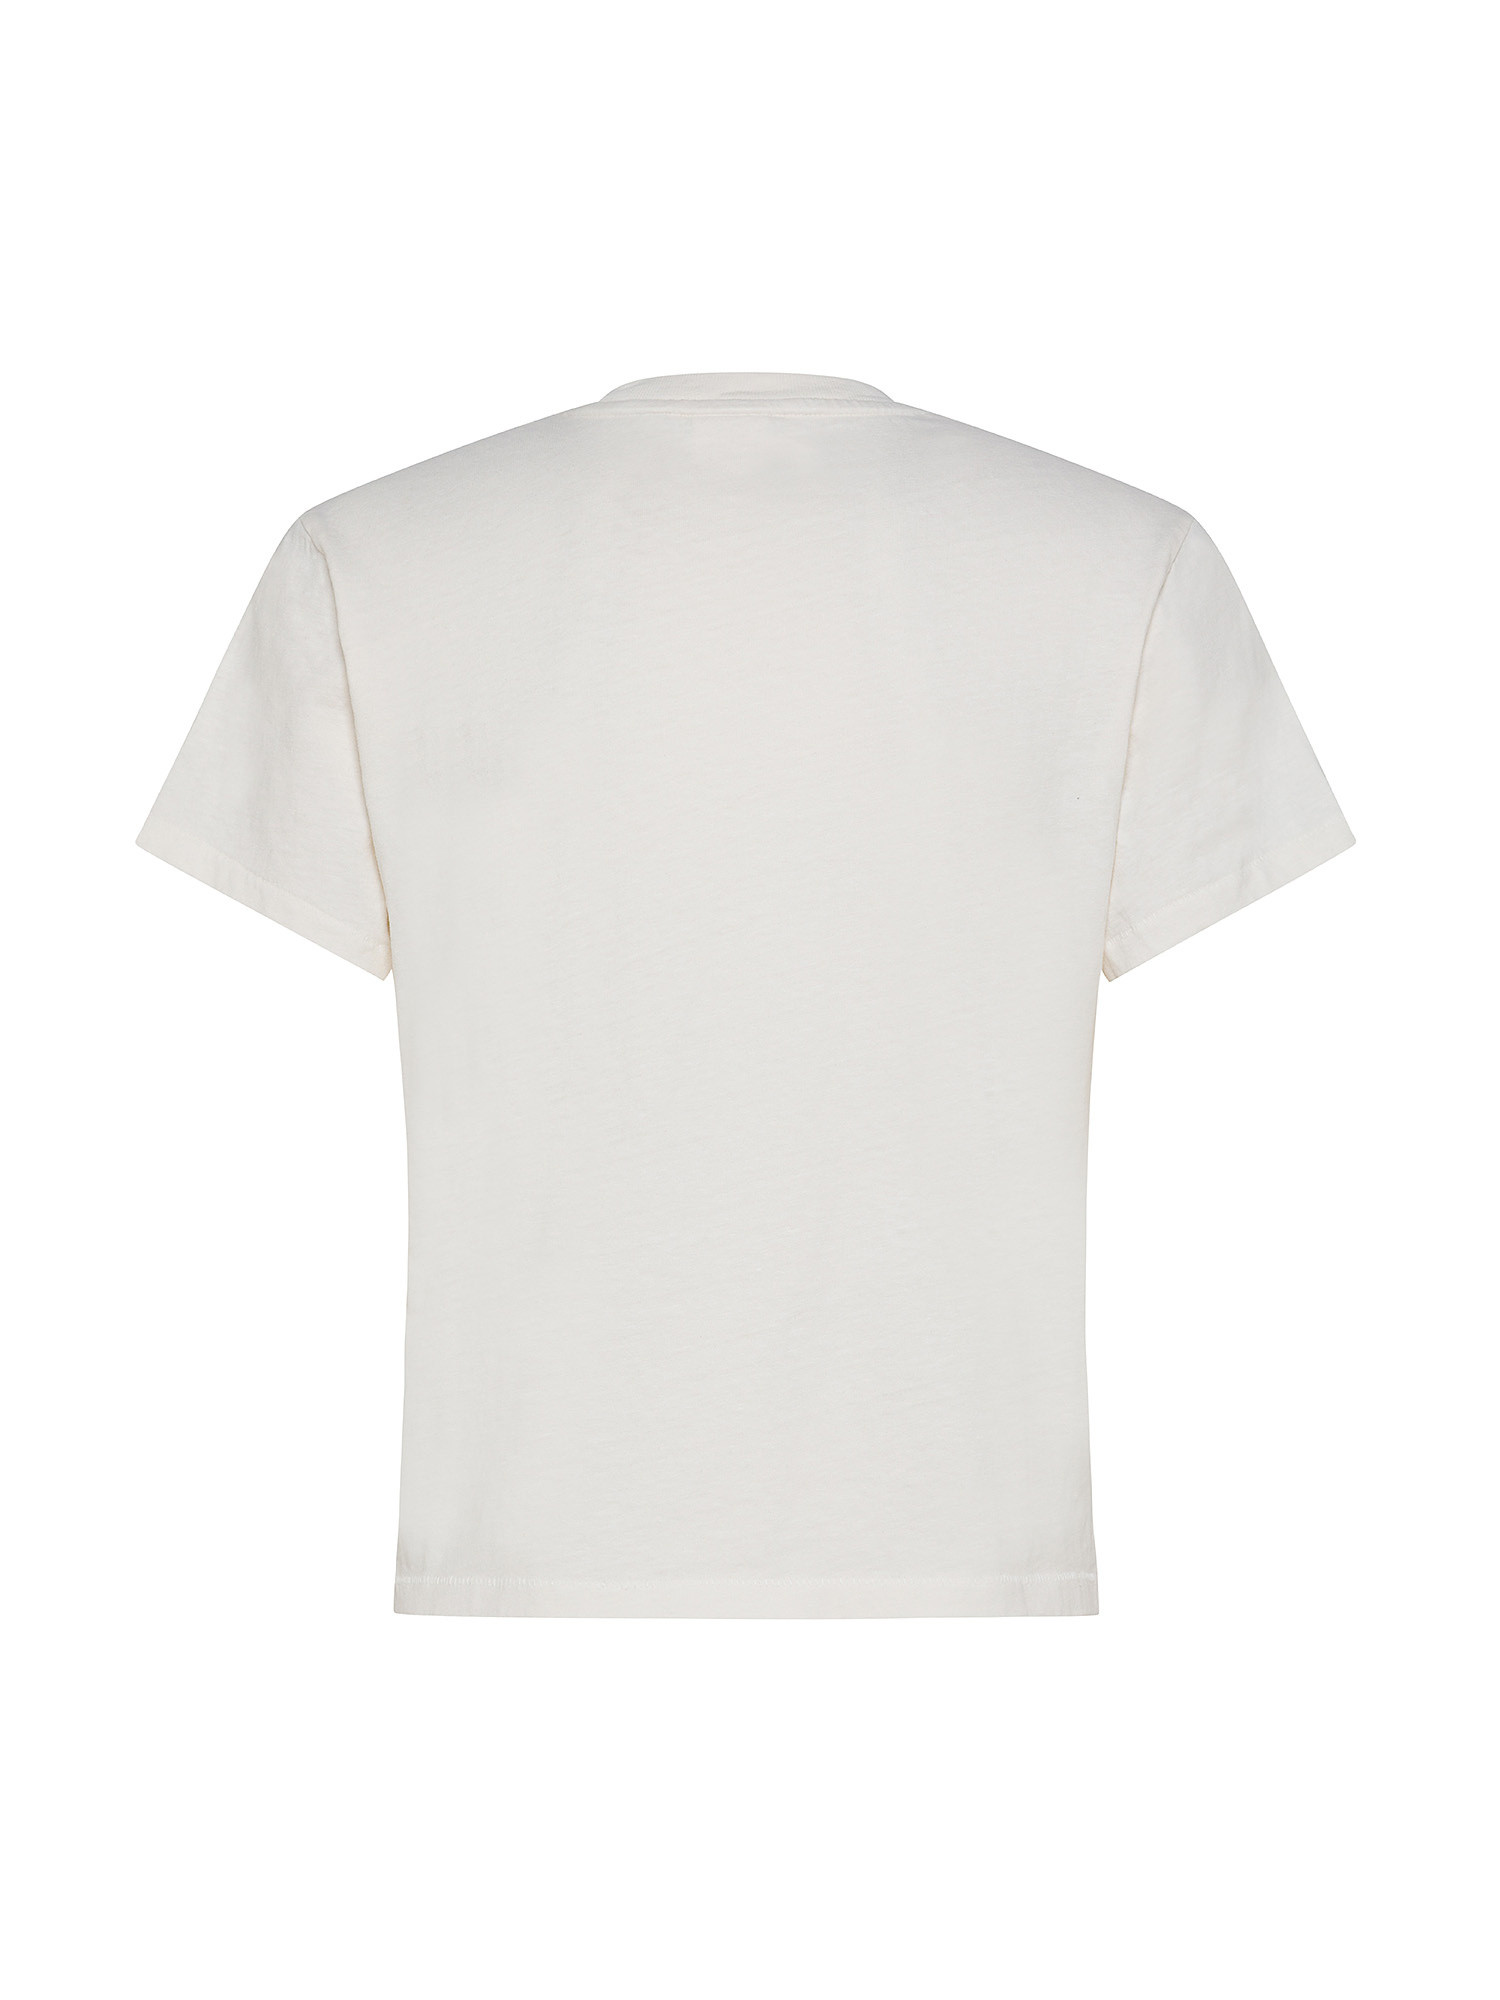 Levi's - classic fit t-shirt, White, large image number 1